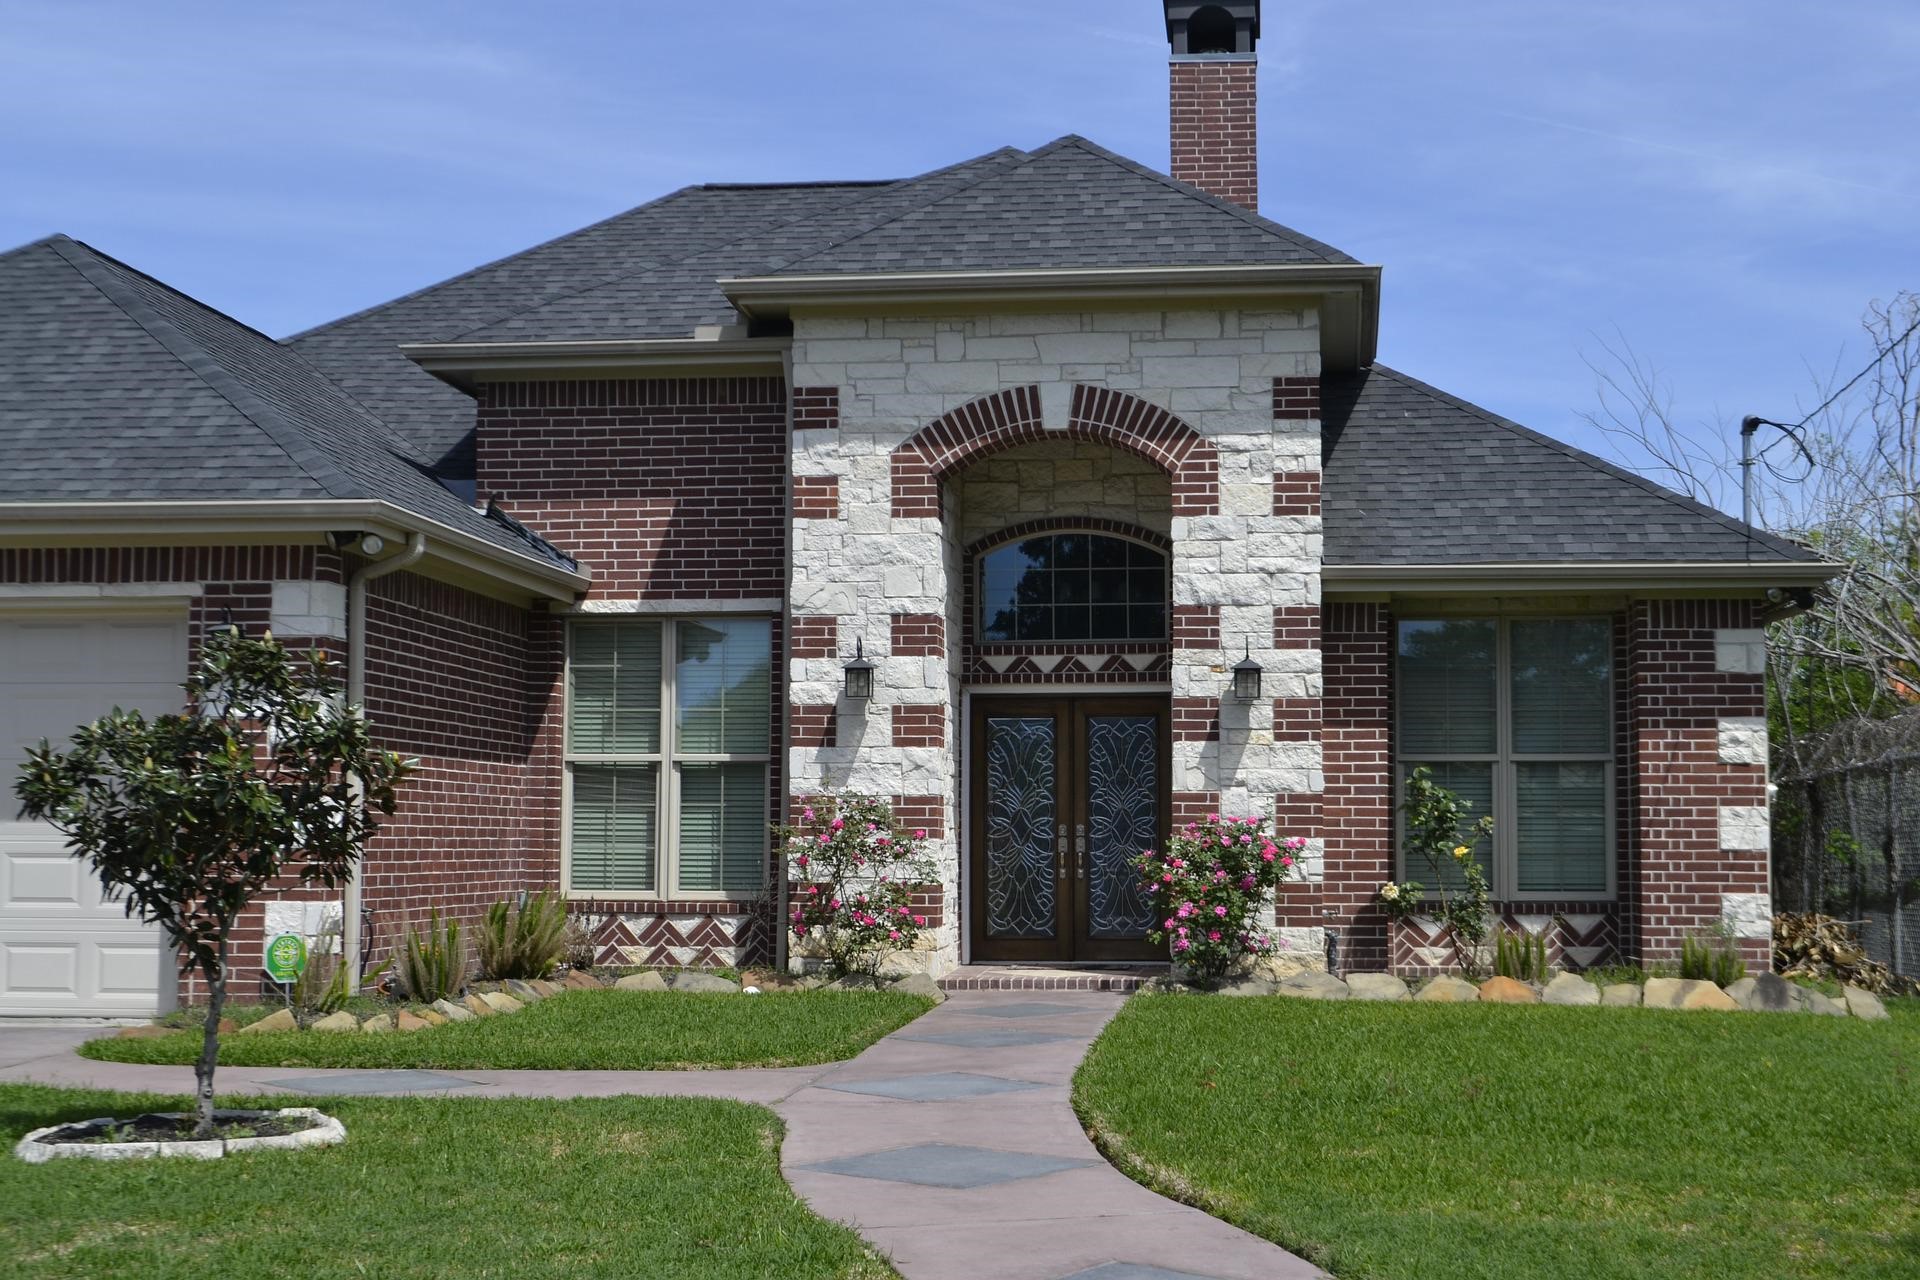 Invest in valuable curb appeal